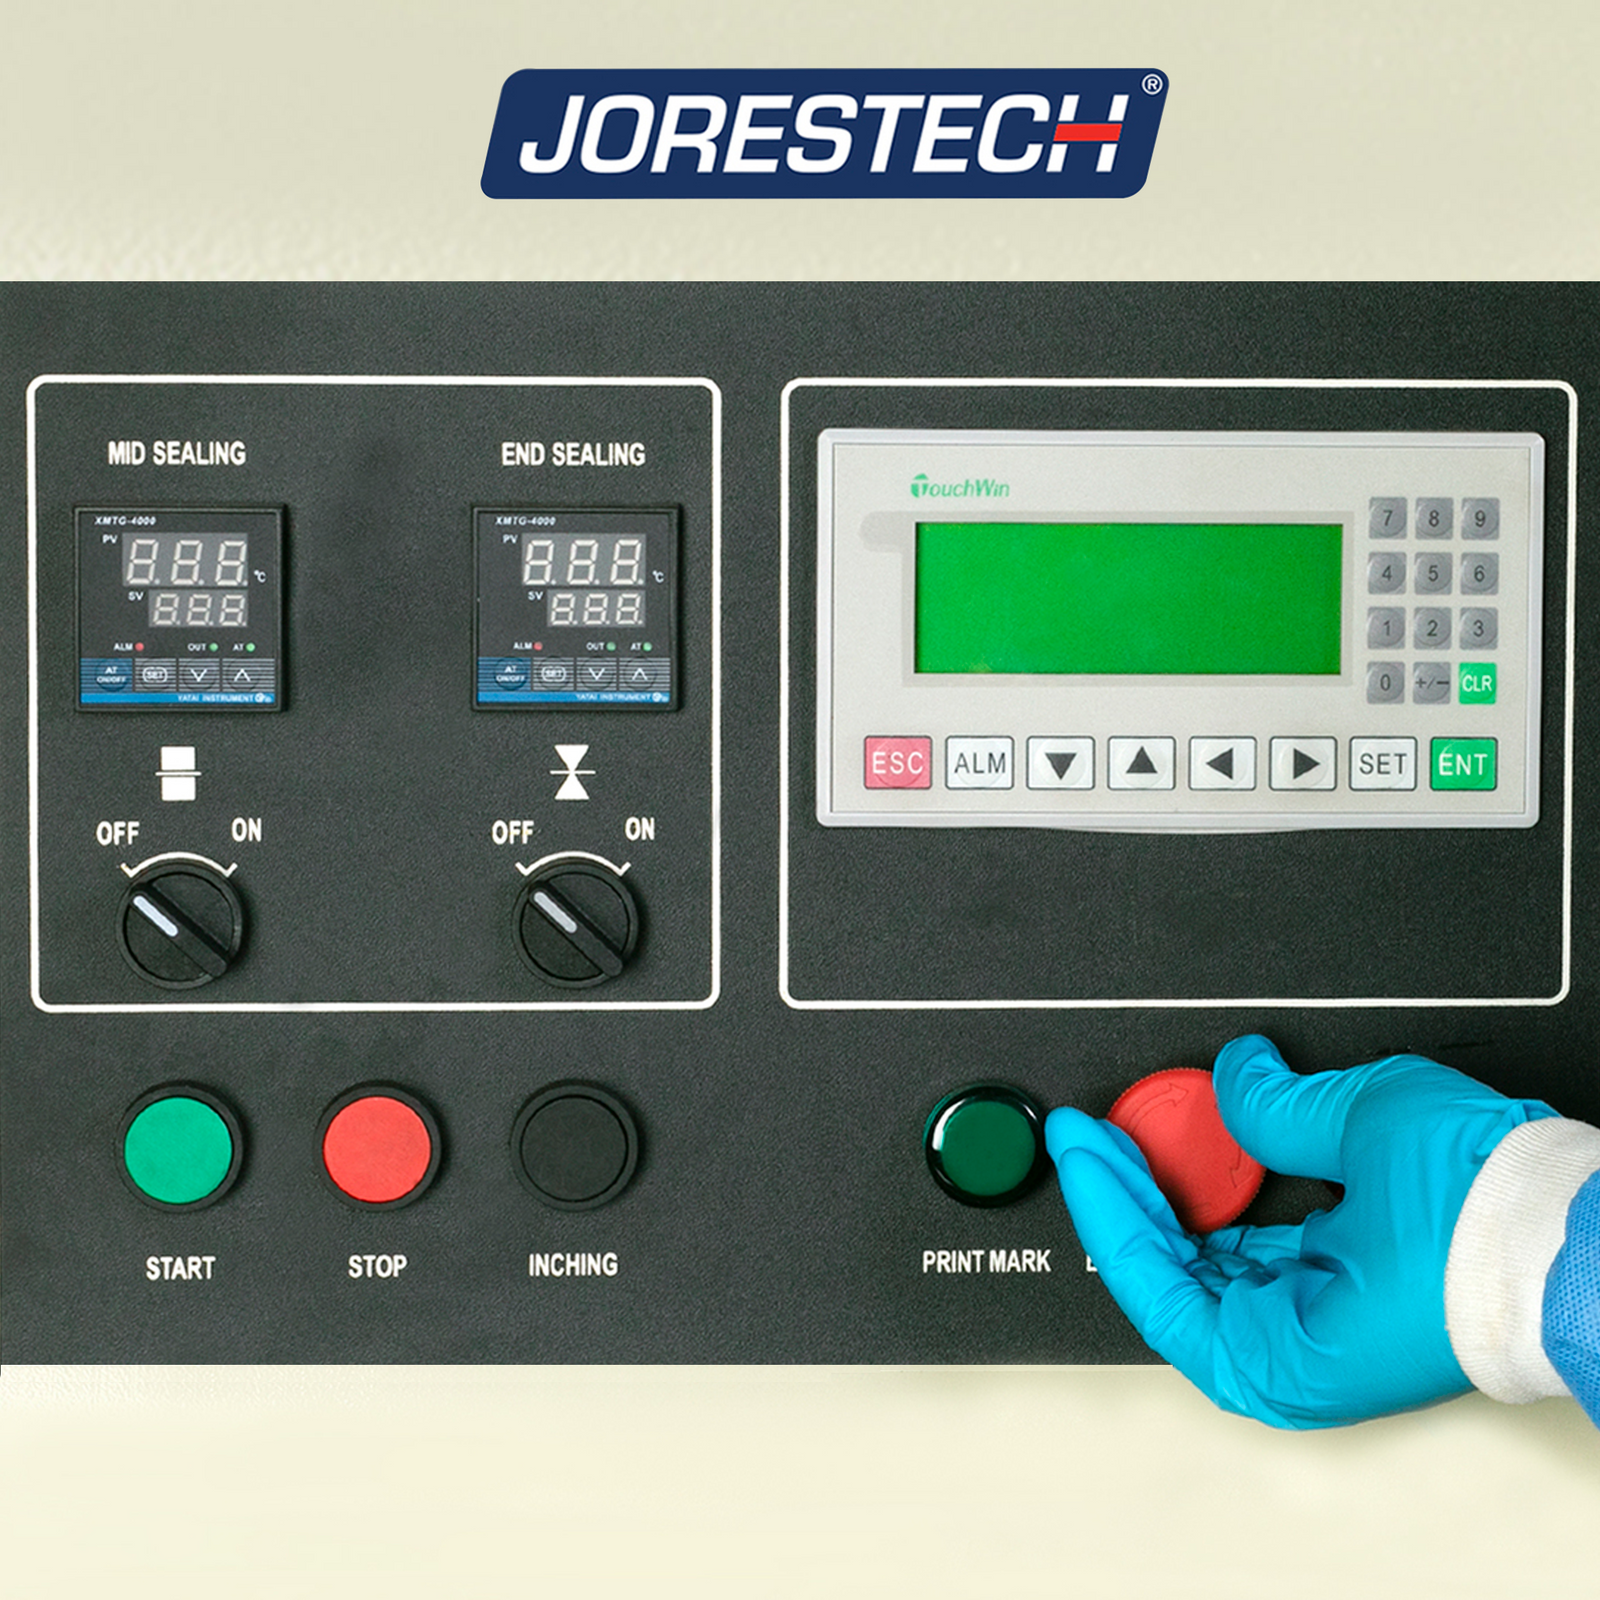 Operator wearing a blue PPE disposable glove is seen operating a Horizontal HFFS flow pack machine. The control panel is shown, and he is about to press the emergency stop button